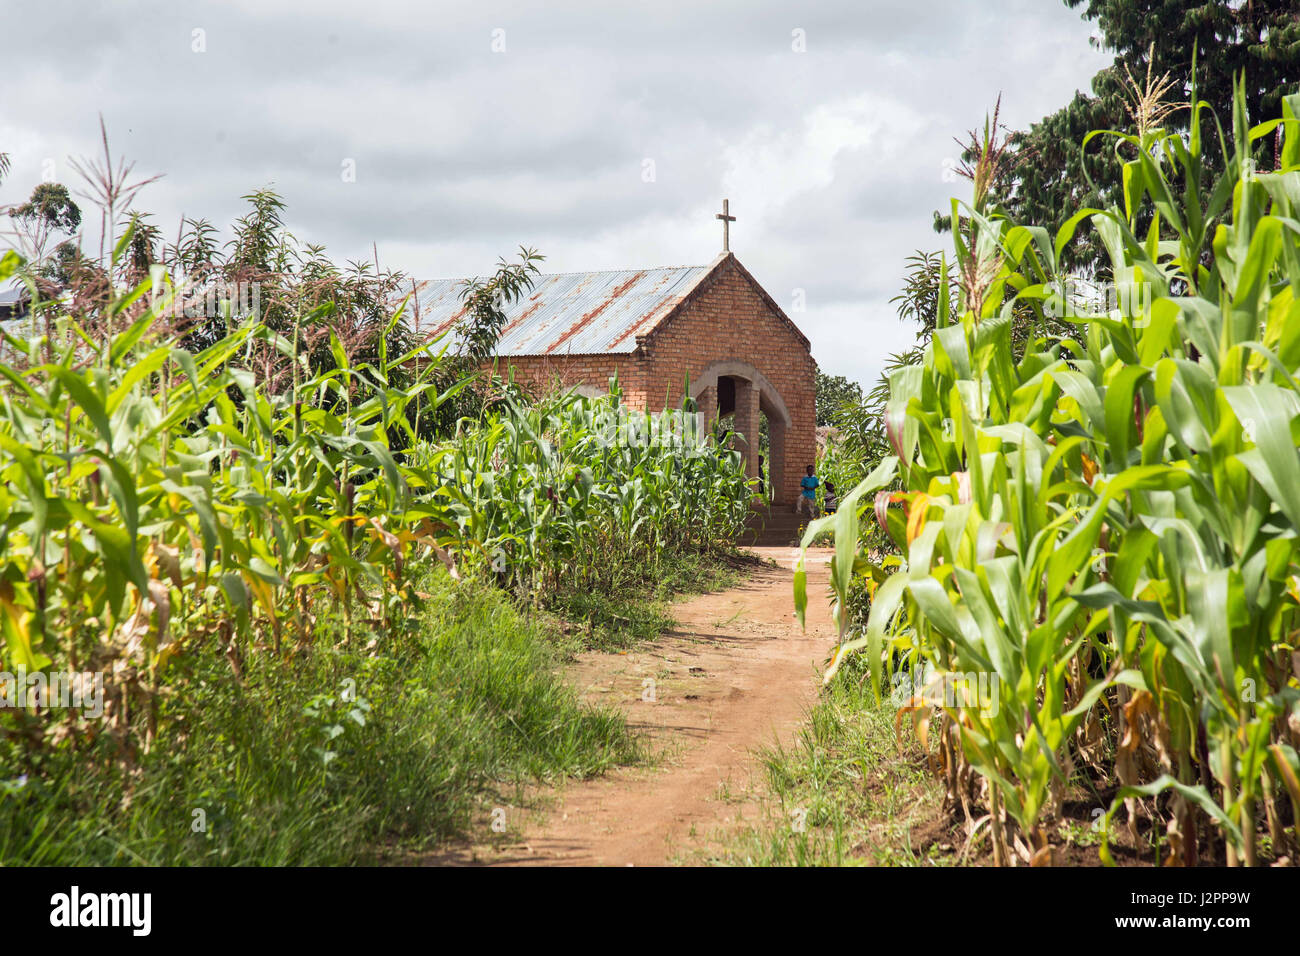 A local church, pictured against a field of maize, in the Southern Highlands of Tanzania. Stock Photo